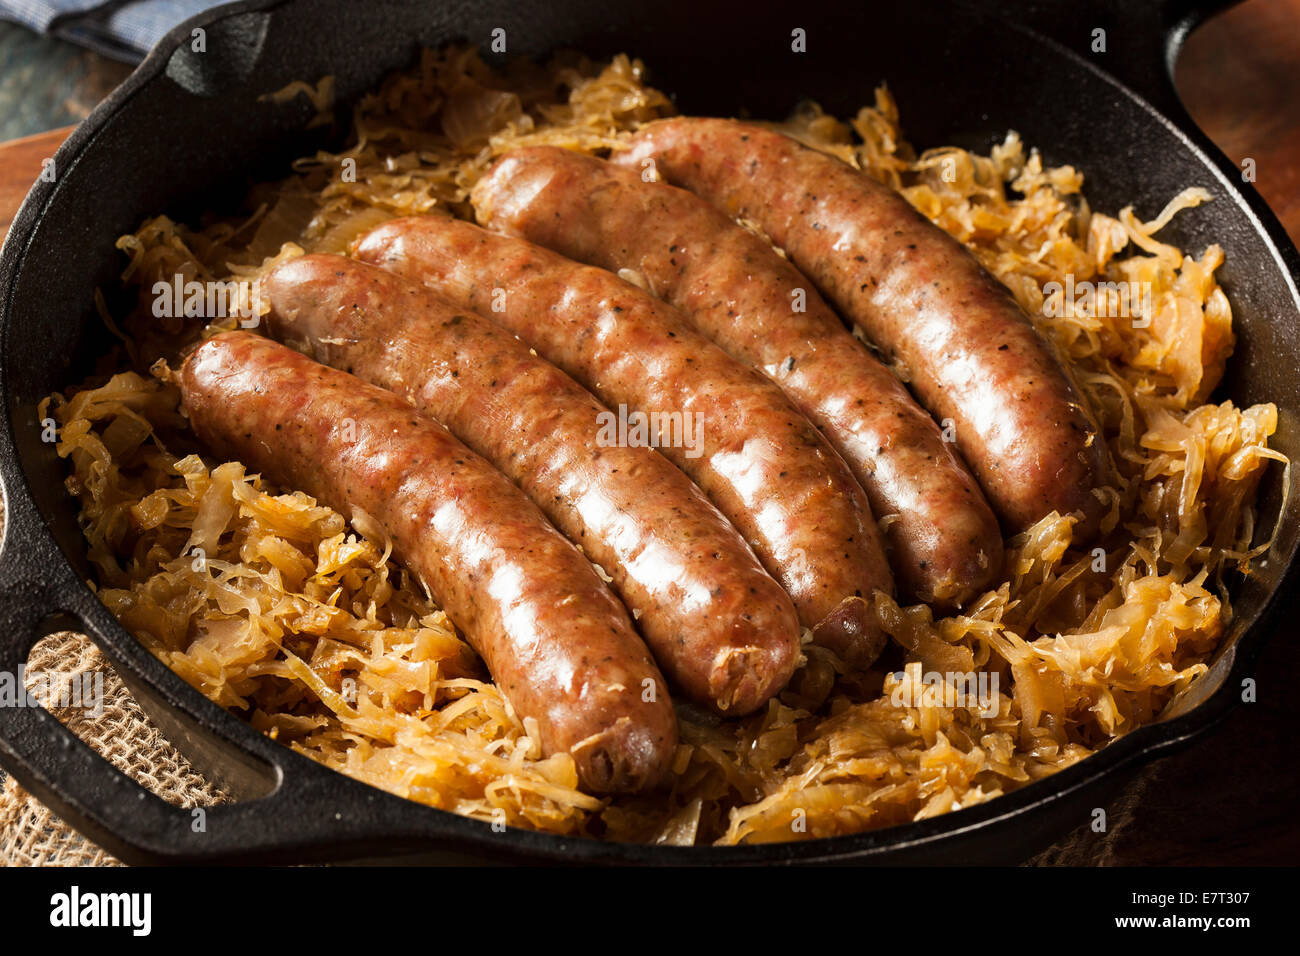 Roasted Beer Bratwurst with Saurkraut in a Pan Stock Photo